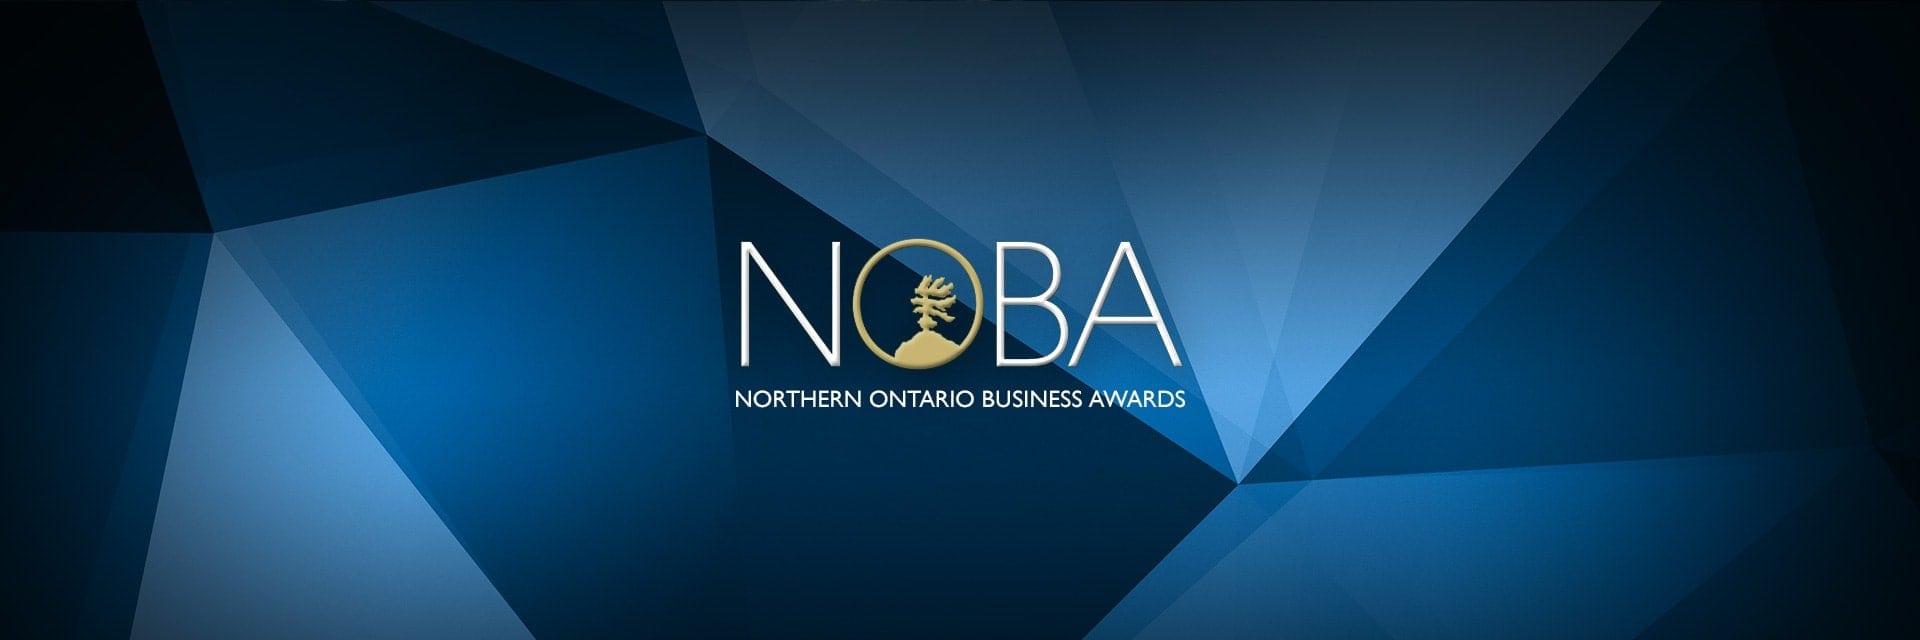 Northern Ontario Business Awards: Company of the Year 2008